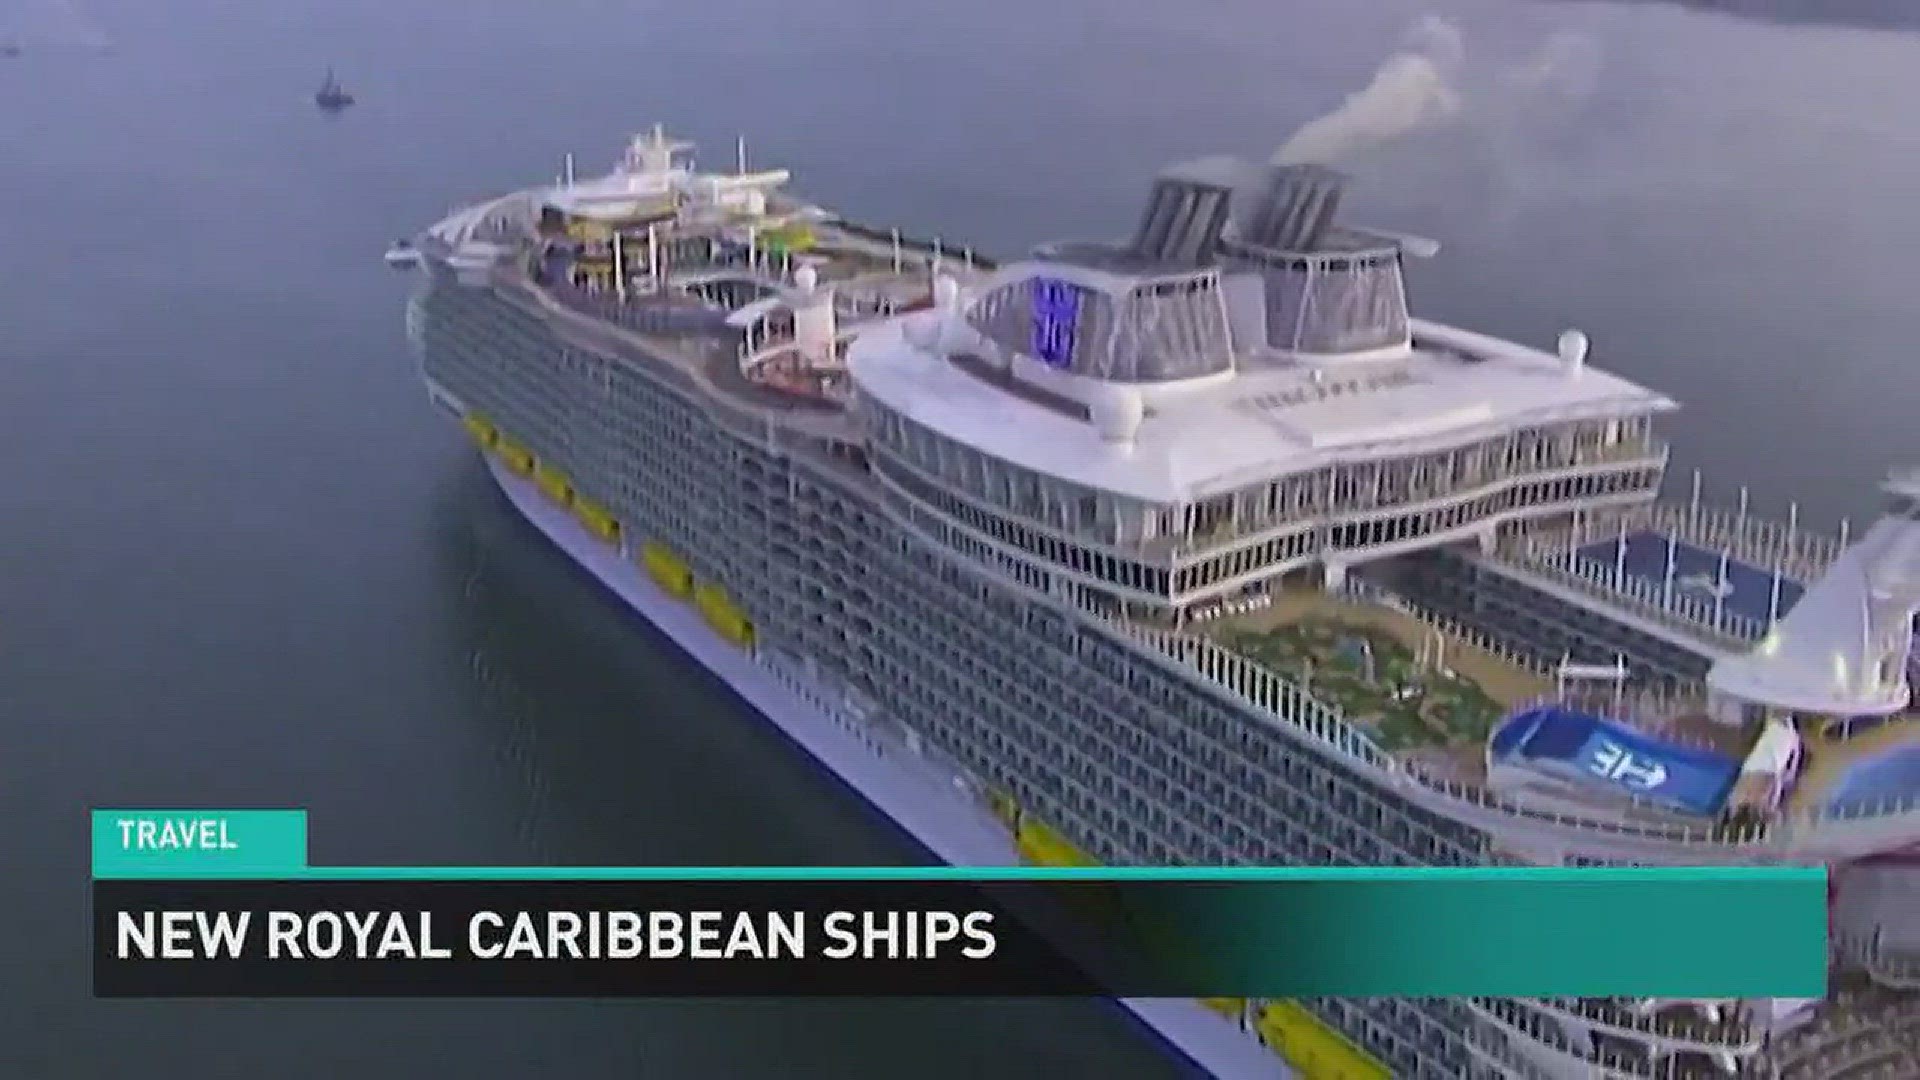 Royal Caribbean is introducing their first new line of ships in a decade.